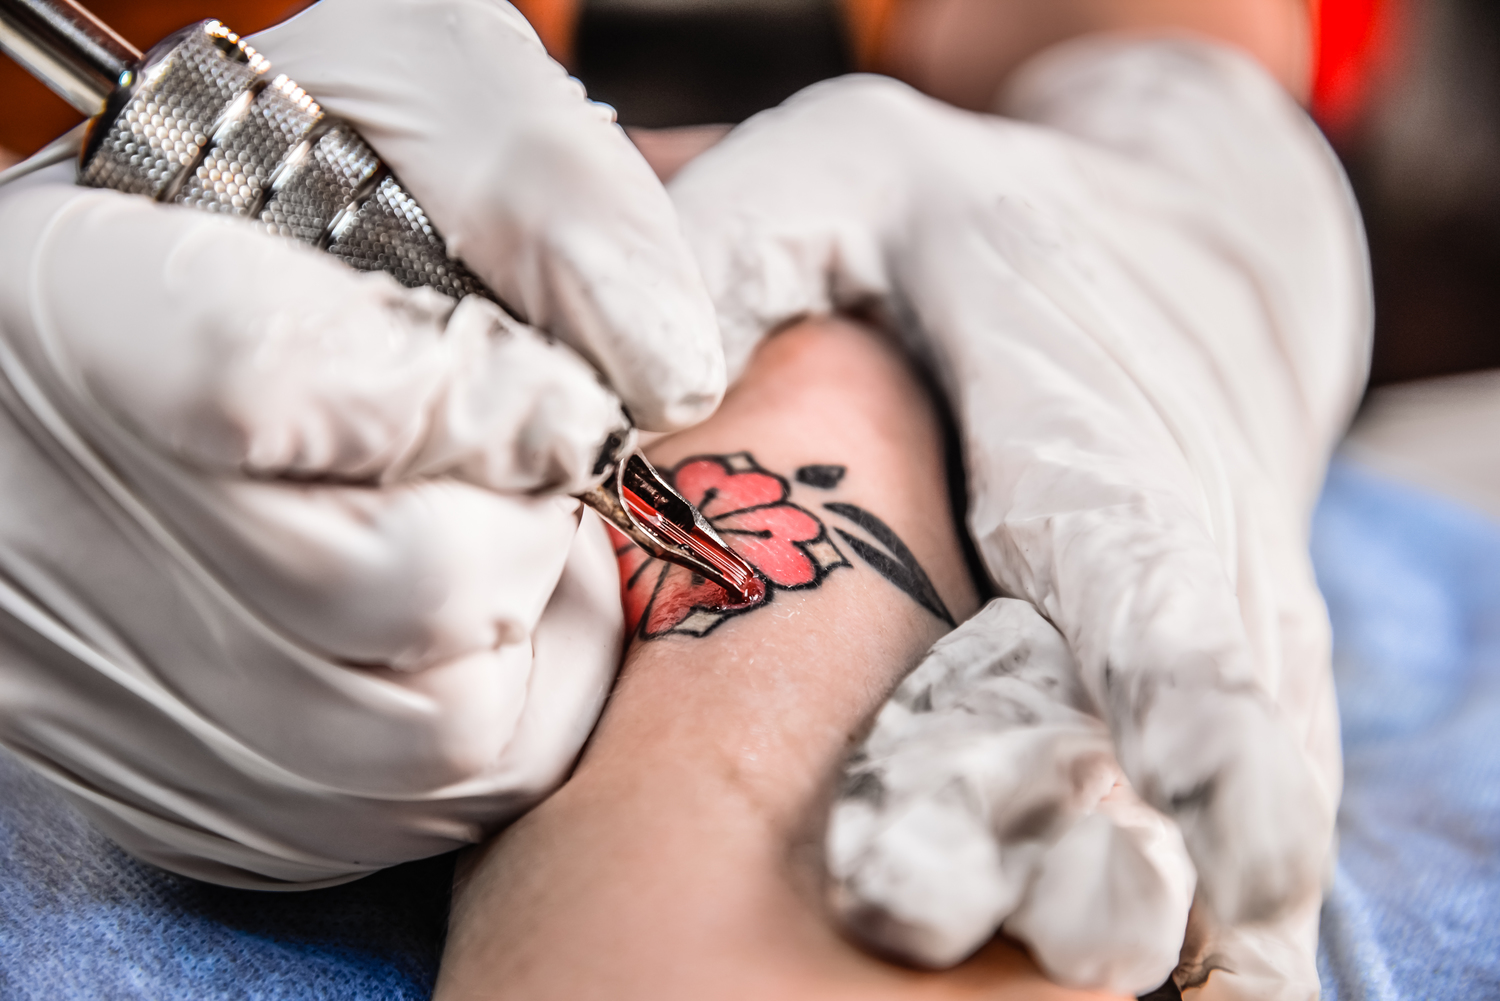 5 reasons to get a tattoo